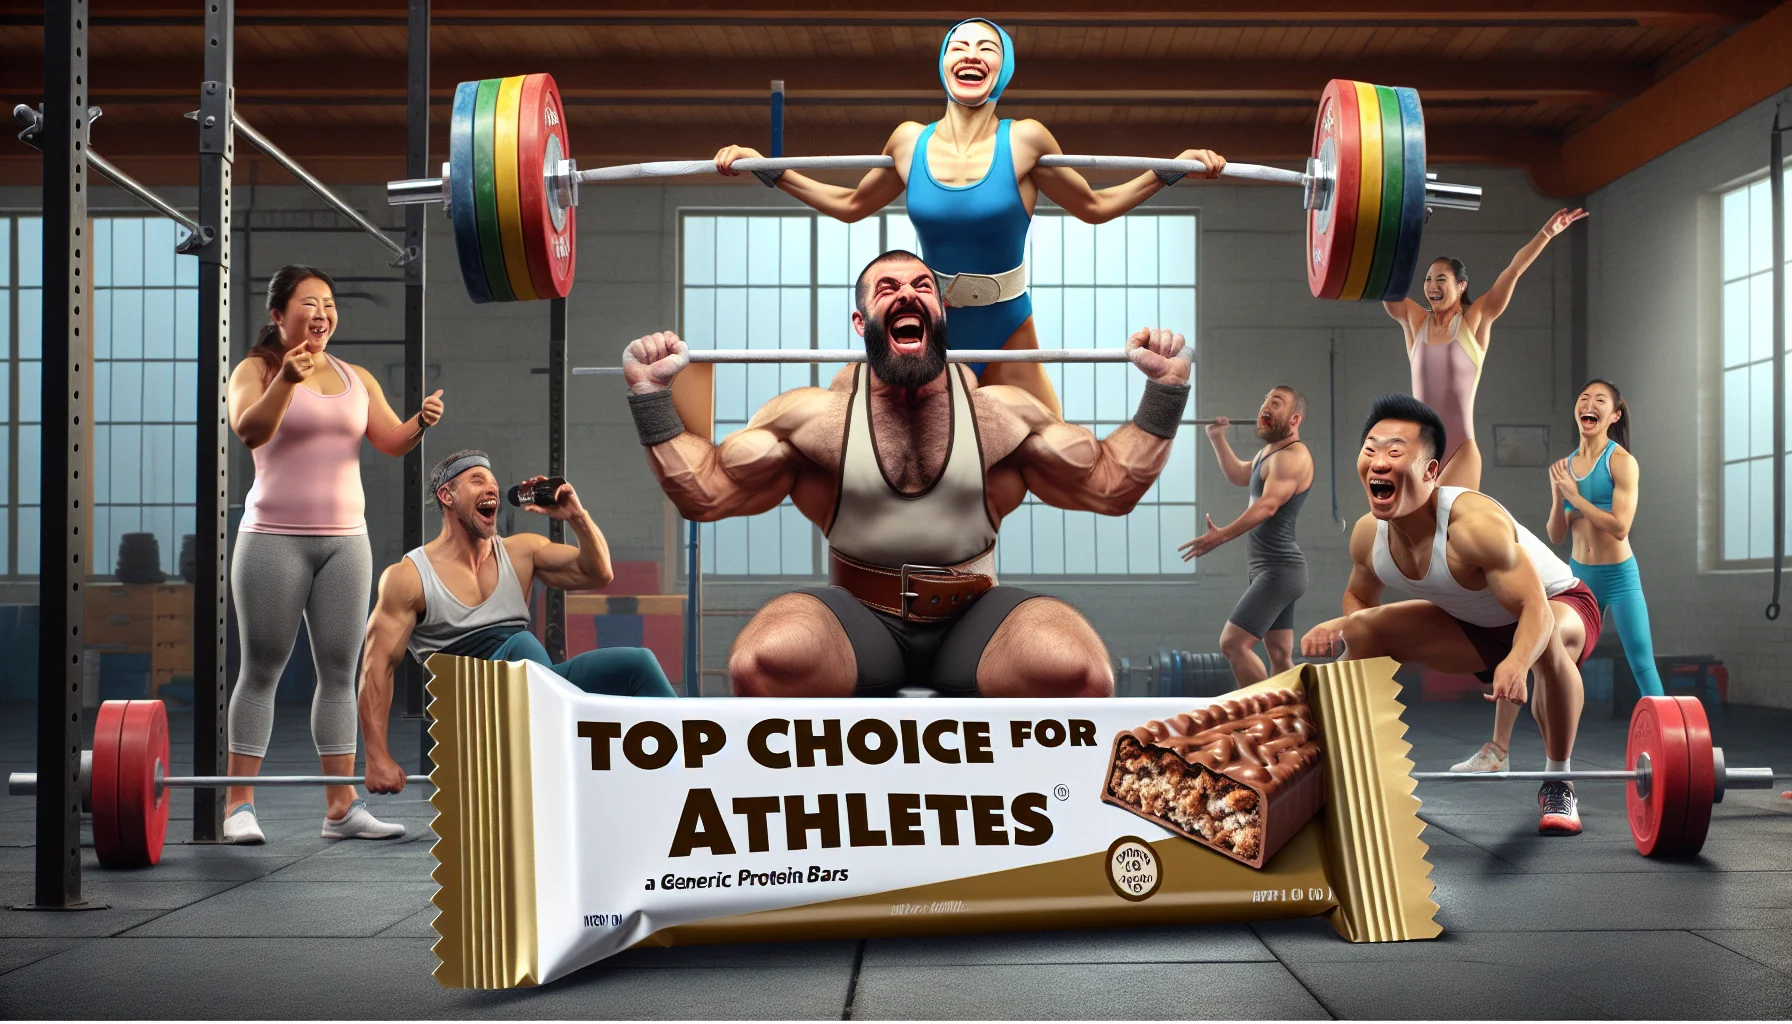 Create a humorous and realistic image that shows a package of generic protein bars with the words 'Top Choice for Athletes' emblazoned across it. The scene is set in a gym. In this gym, a diverse group of athletes are happily working out with imbued energy. One of these athletes, a Middle Eastern female weightlifter, has just completed a hefty deadlift and now she's triumphantly chomping into a protein bar. An Asian male gymnast is effortlessly executing a routine on the parallel bars, all while keeping his balance and savoring a bite of a protein bar. Proving that athletes from different disciplines value these nutritional supplements.